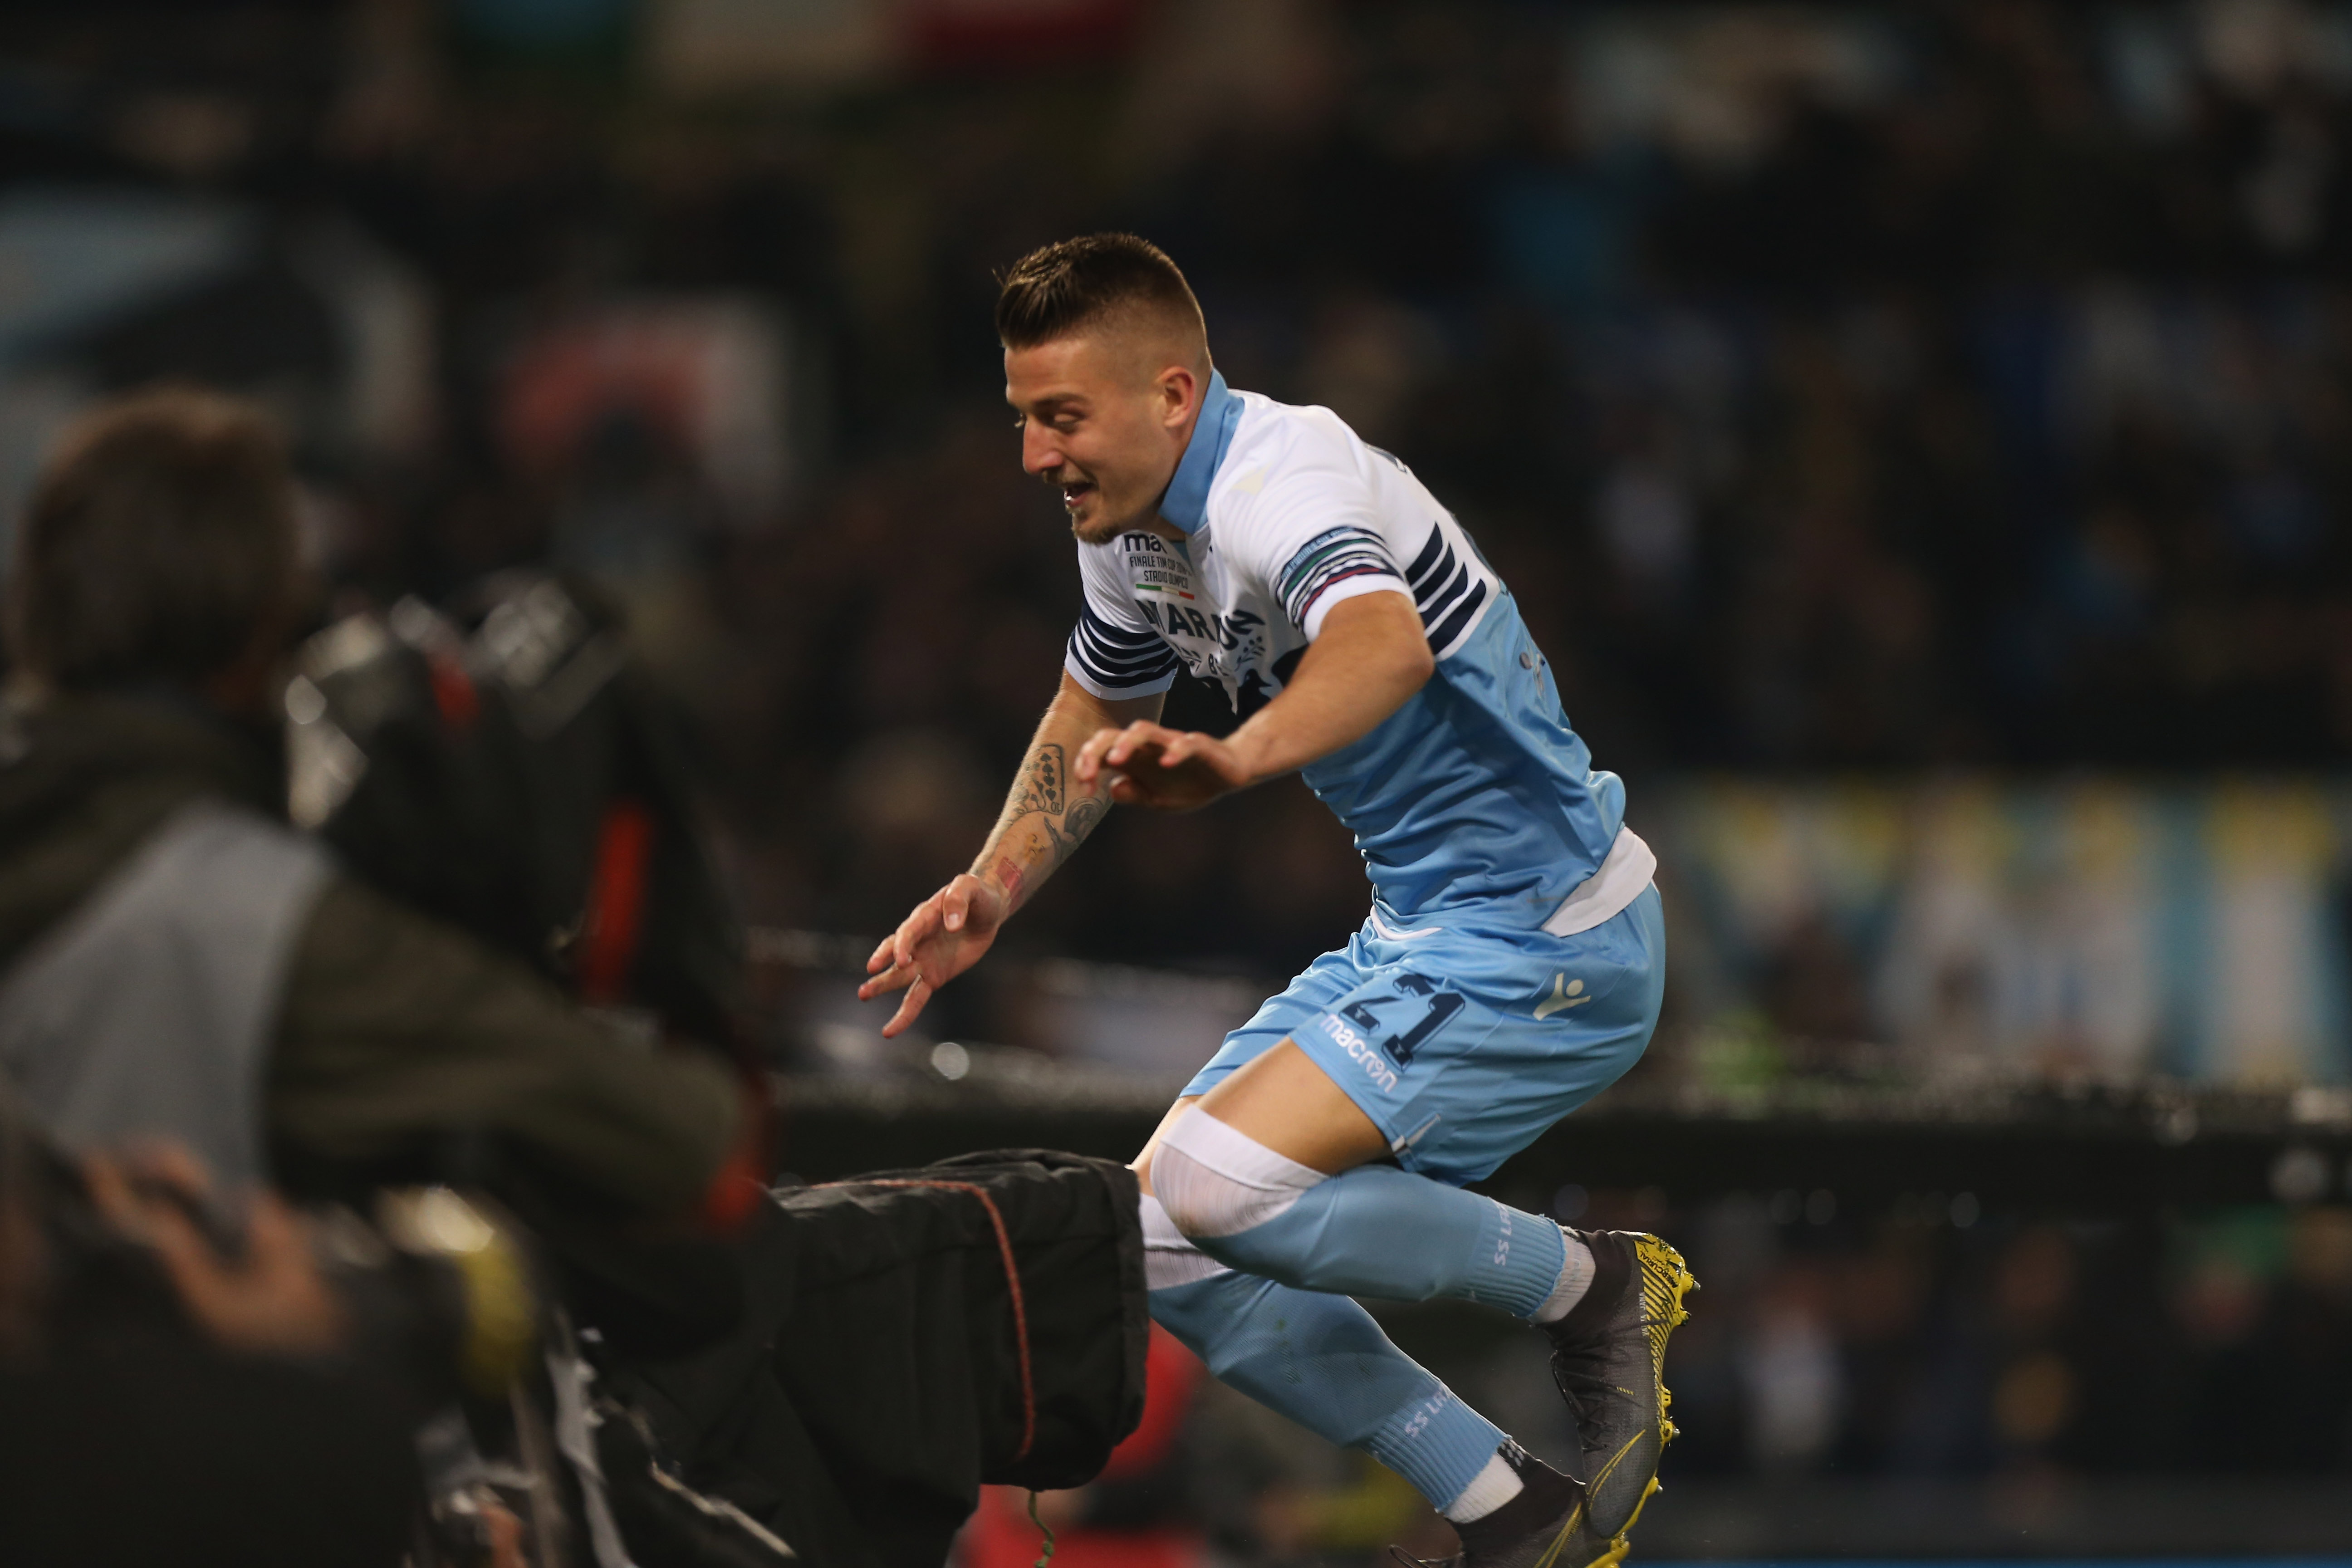 Will Milinkovic-Savic jump at the chance of joining Real Madrid? (Photo by Paolo Bruno/Getty Images for Lega Serie A)